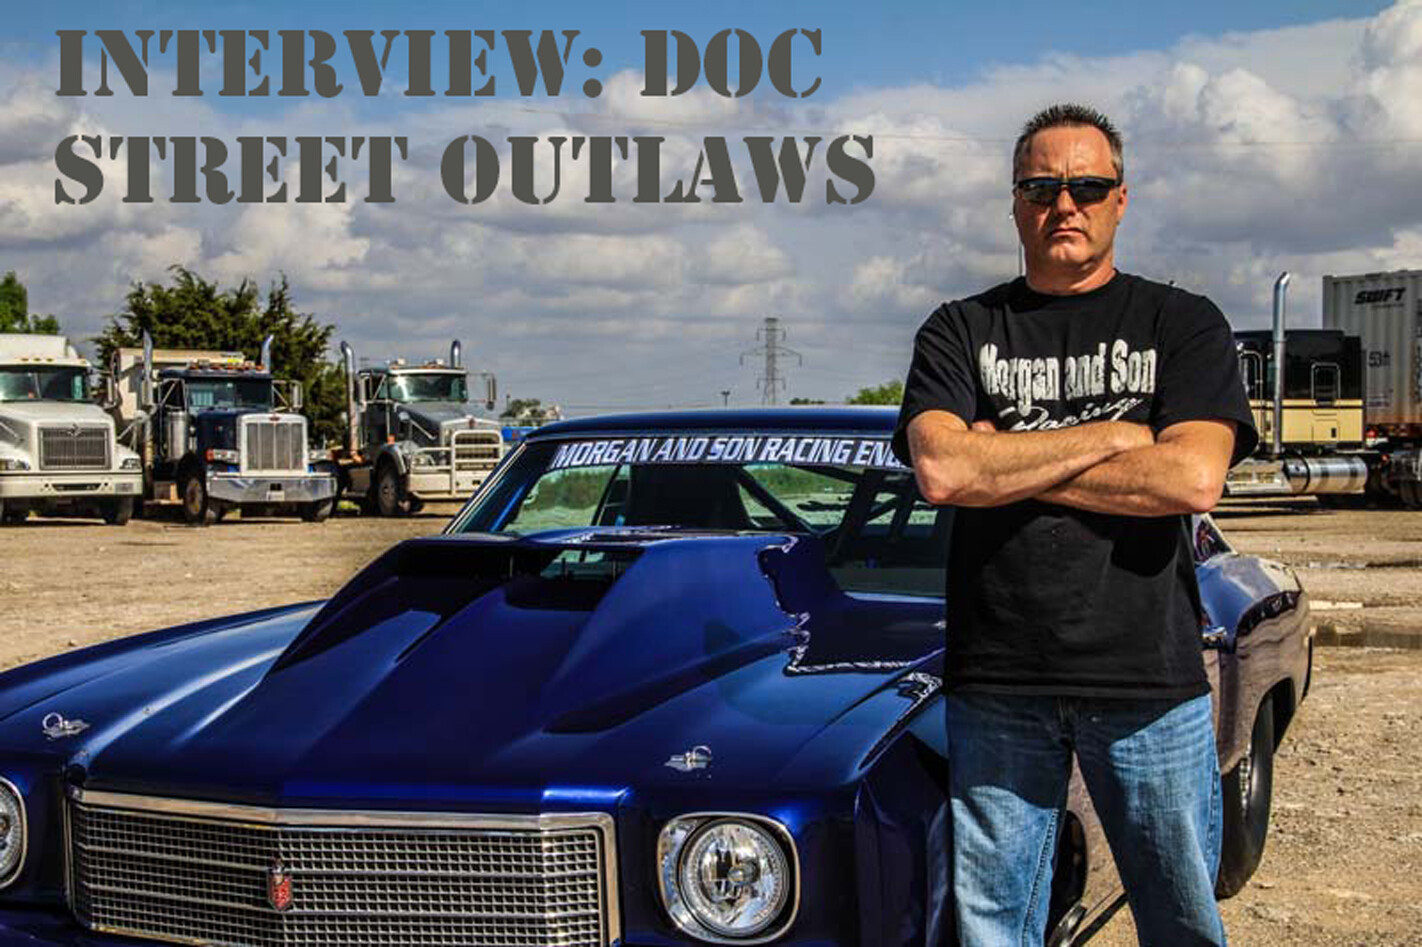 VIDEO: DOC FROM STREET OUTLAWS INTERVIEW